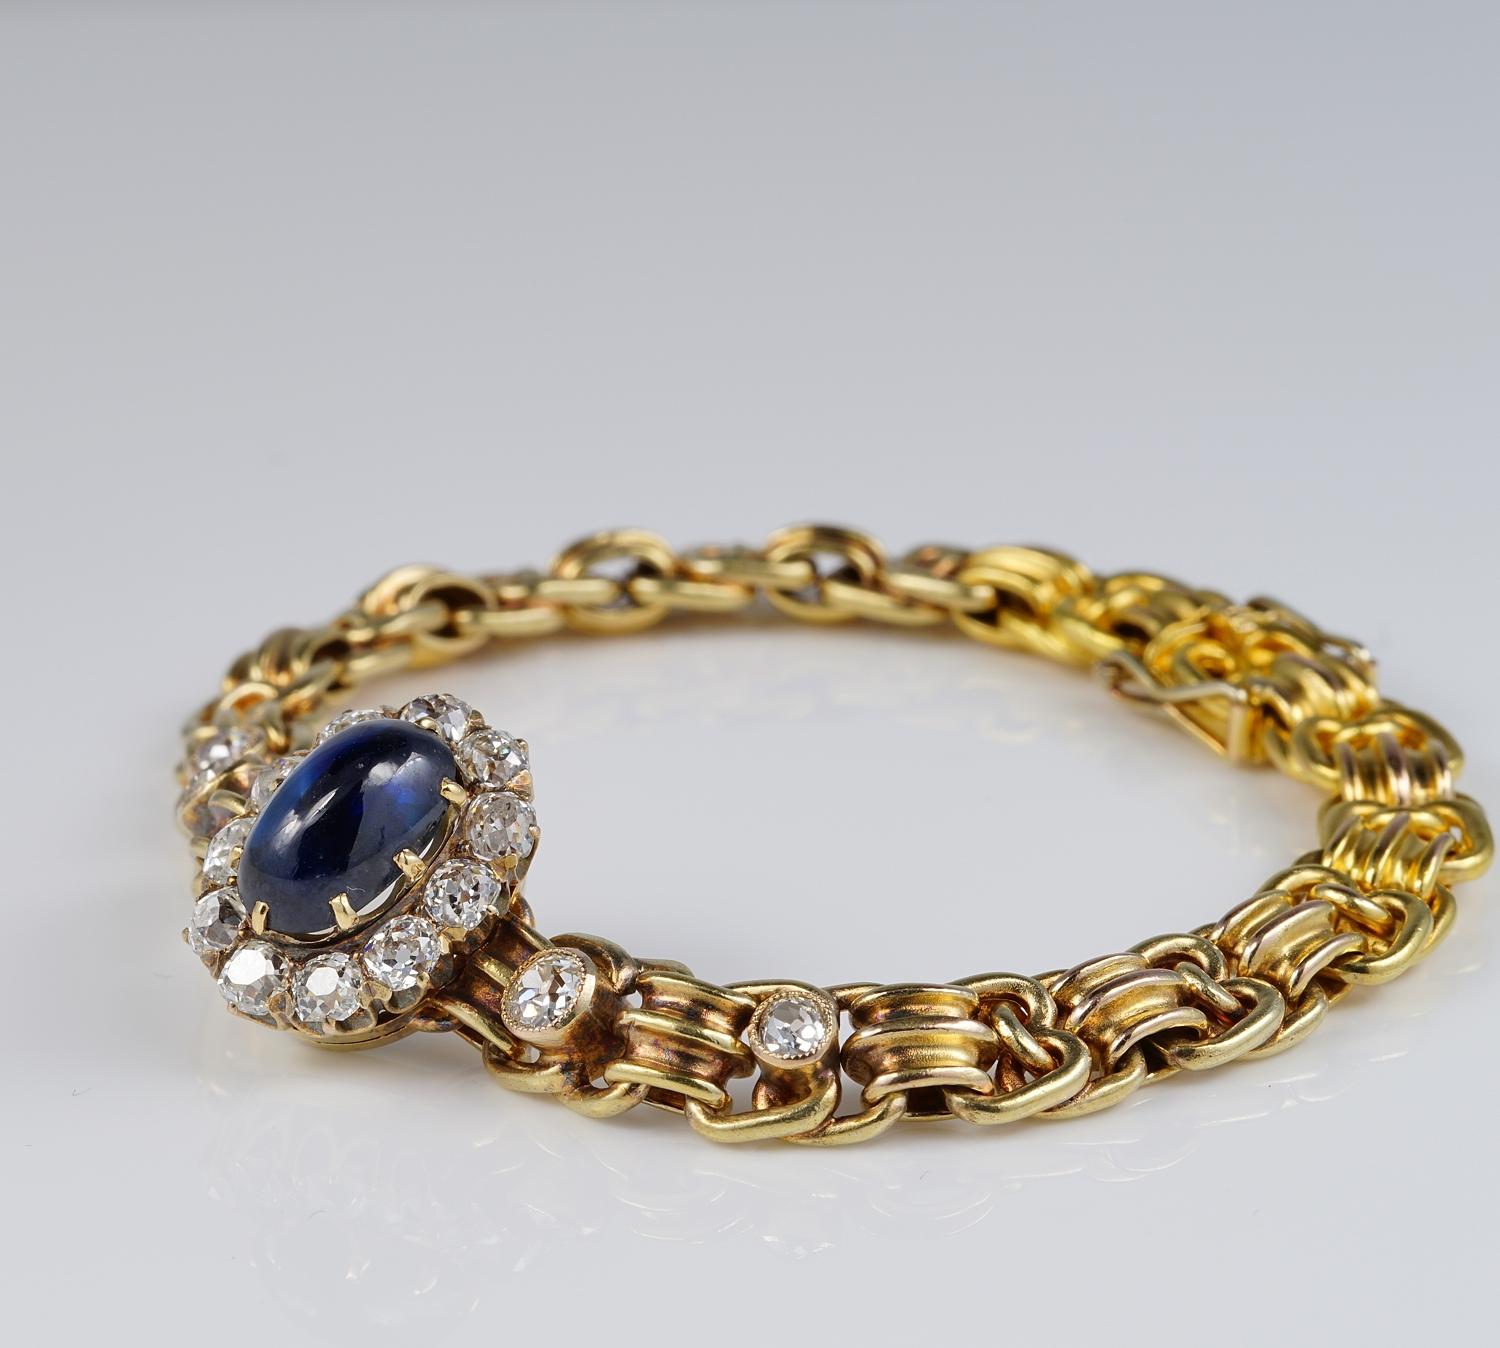 Antique 5.00 Ct Natural Sapphire 3.20 Ct Diamond Russian Bracelet In Good Condition For Sale In Napoli, IT